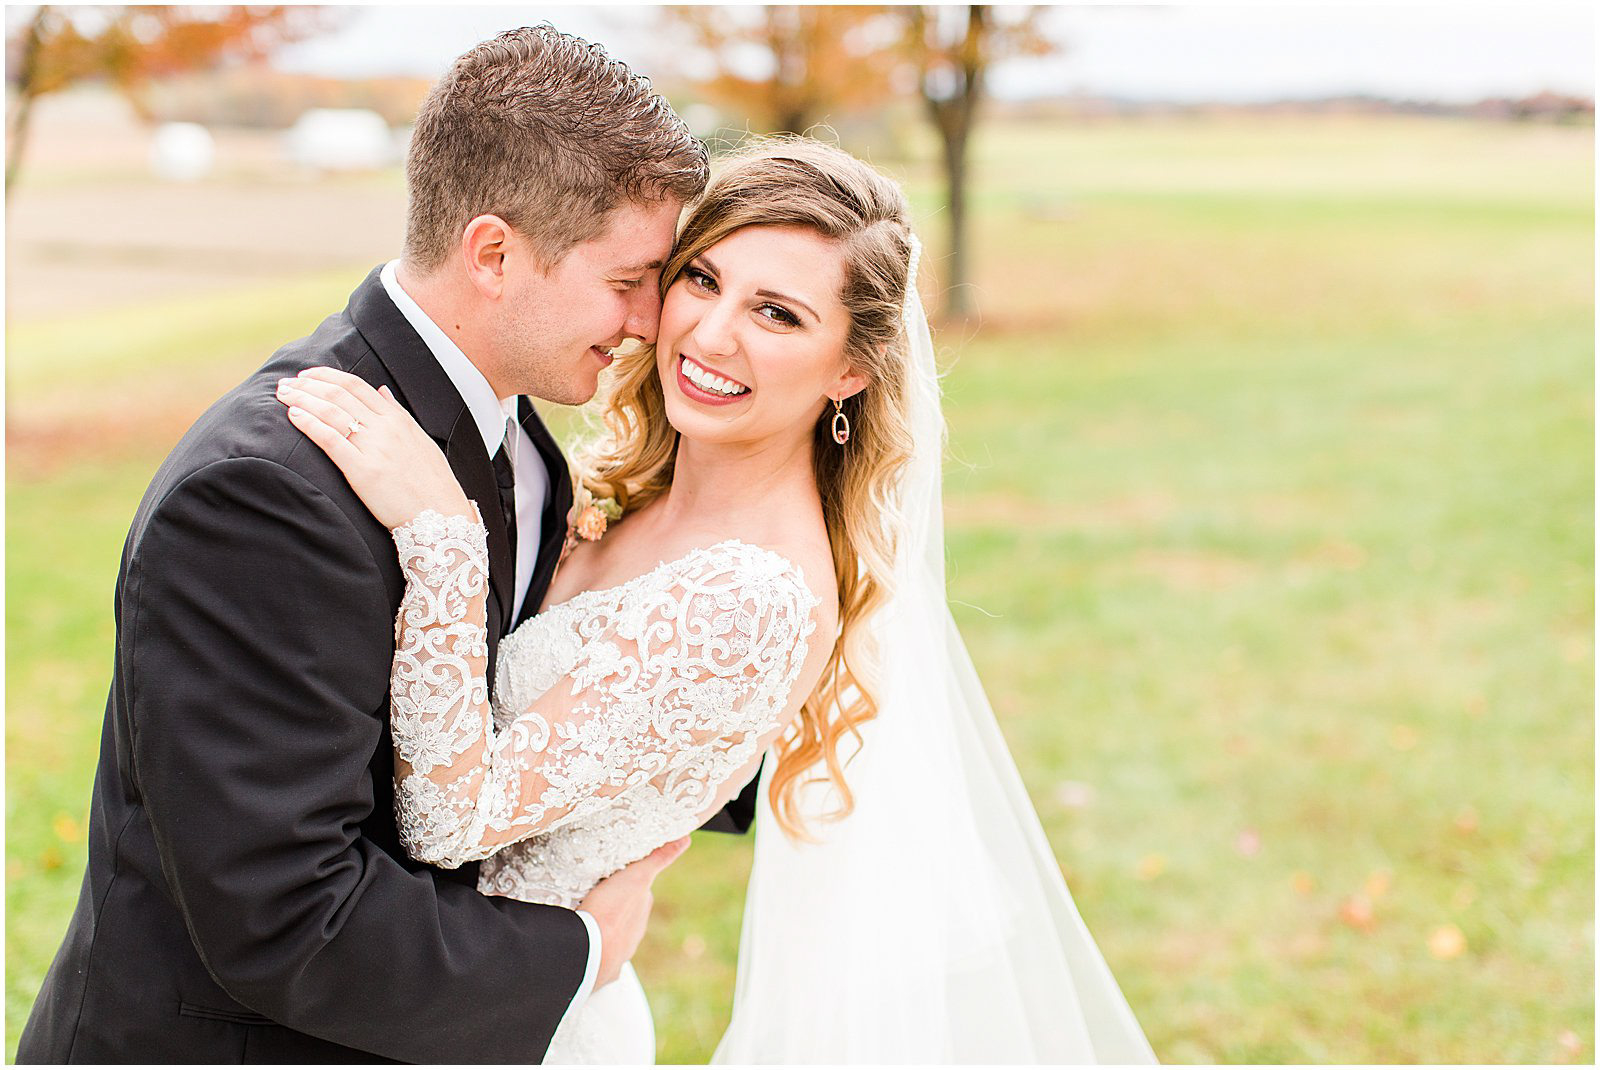 A Romantic Fall Wedding in Ferdinand, IN | Tori and Kyle | Bret and Brandie Photography 0057.jpg